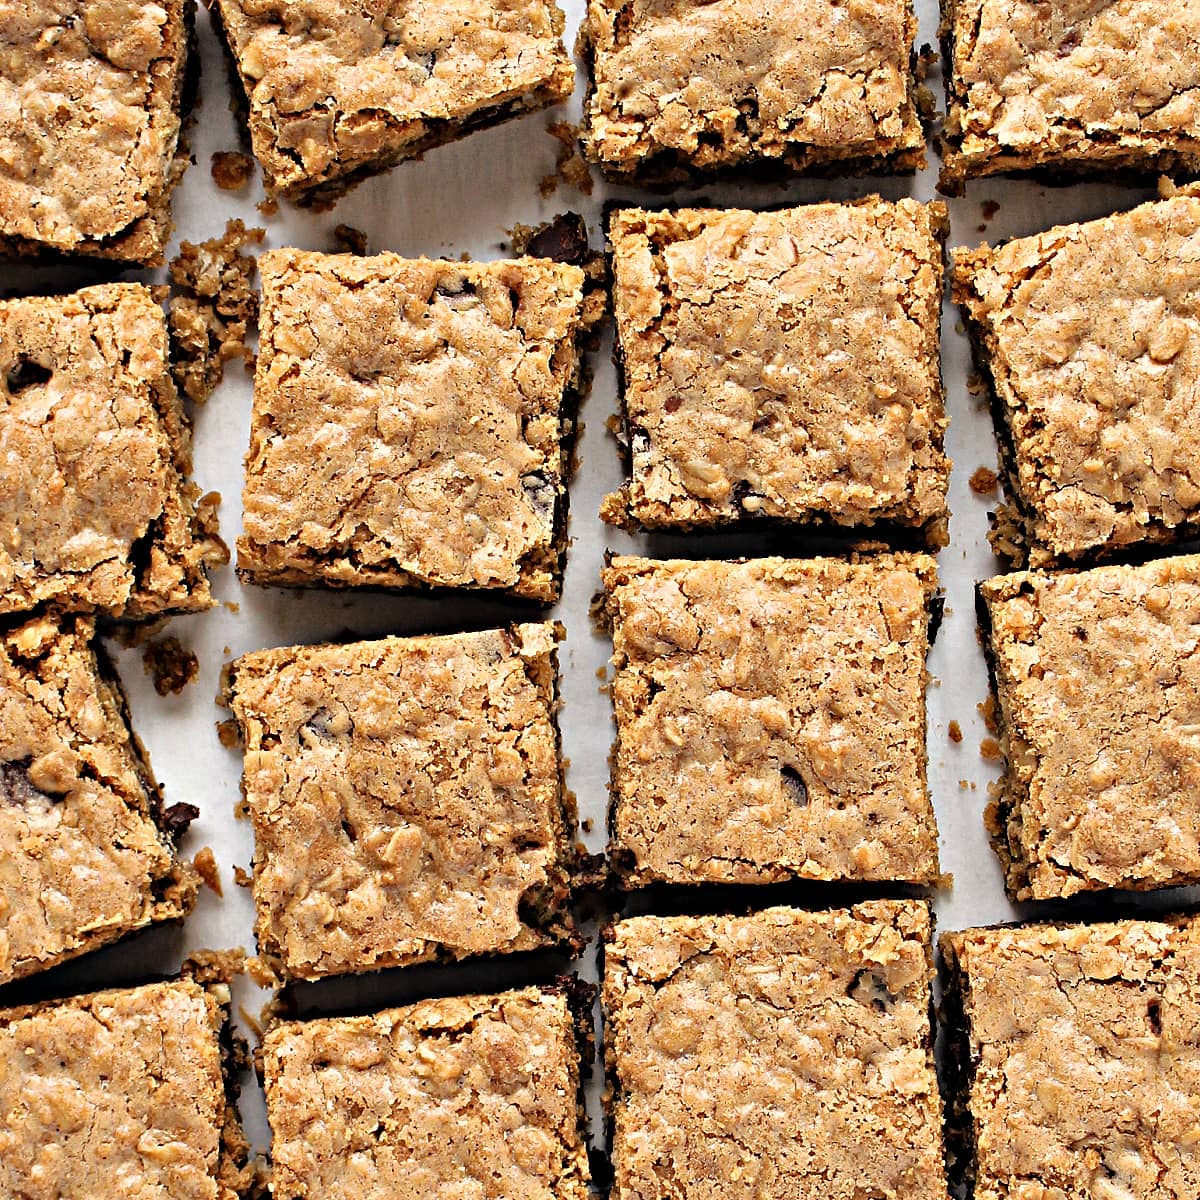 Closeup of textured, slightly crackled tops of Oat Bars cut in squares.